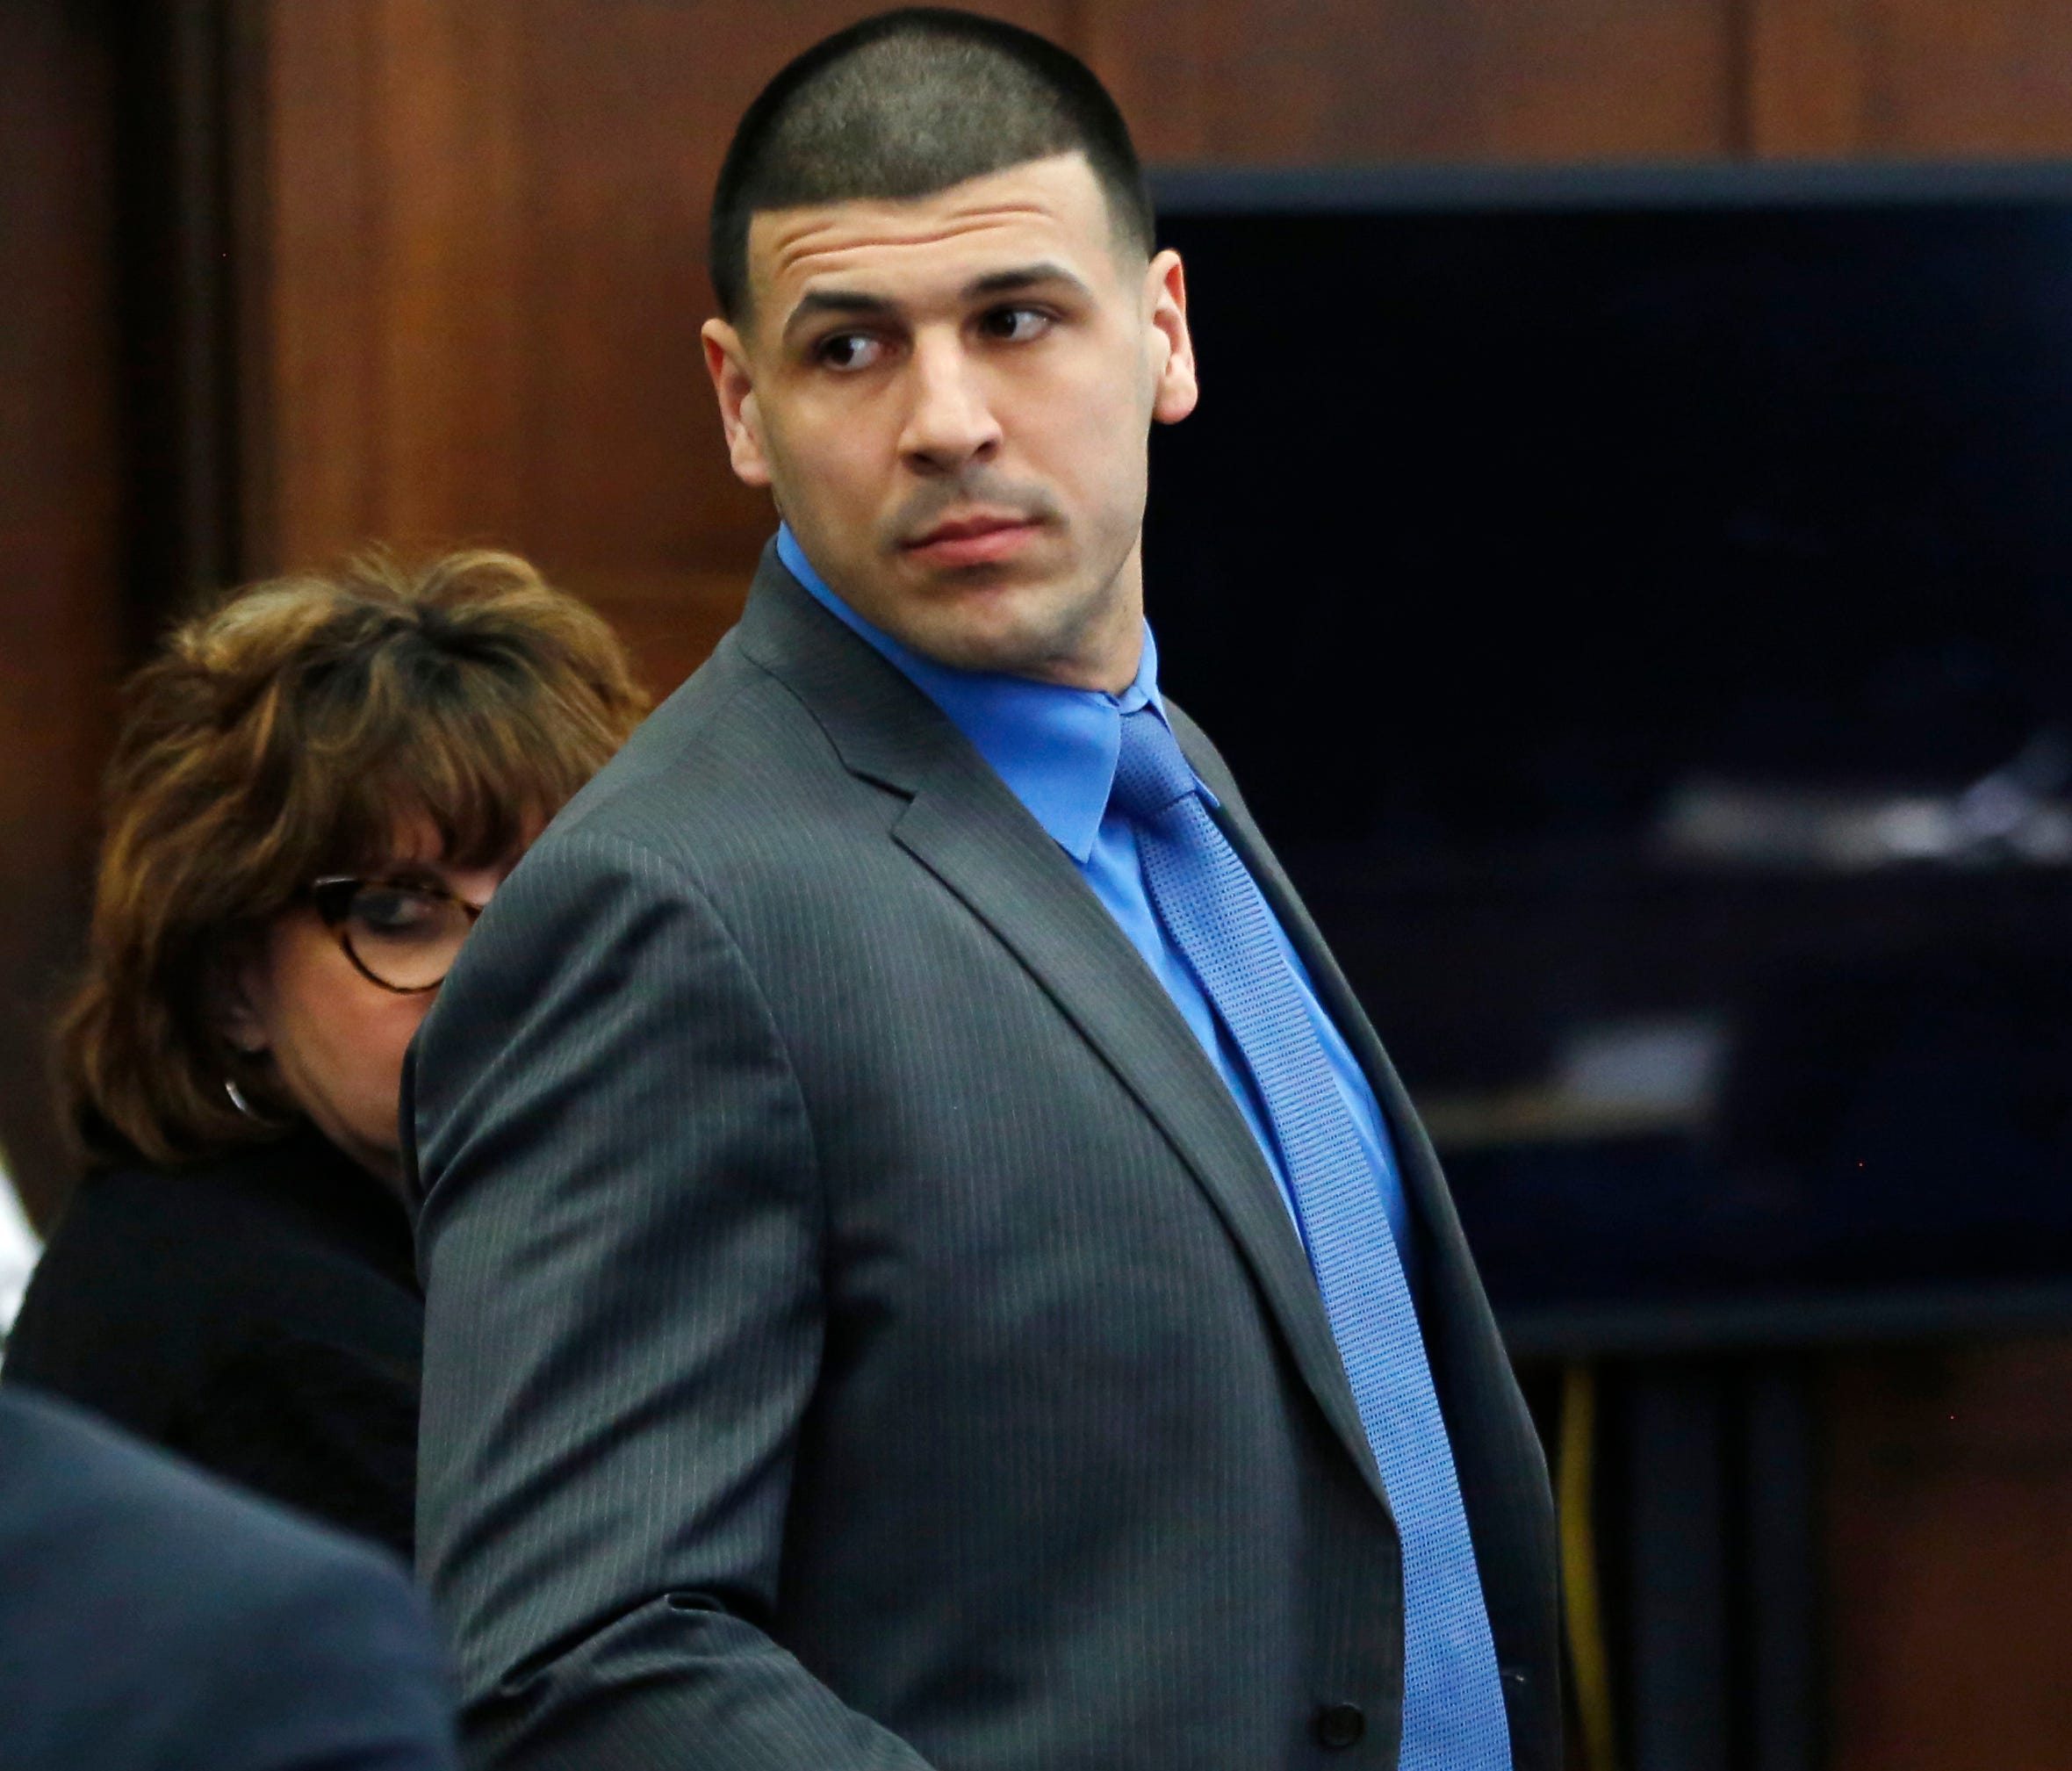 Aaron Hernandez, 27, was found hanged in his prison cell early Wednesday and was later pronounced dead at a hospital.